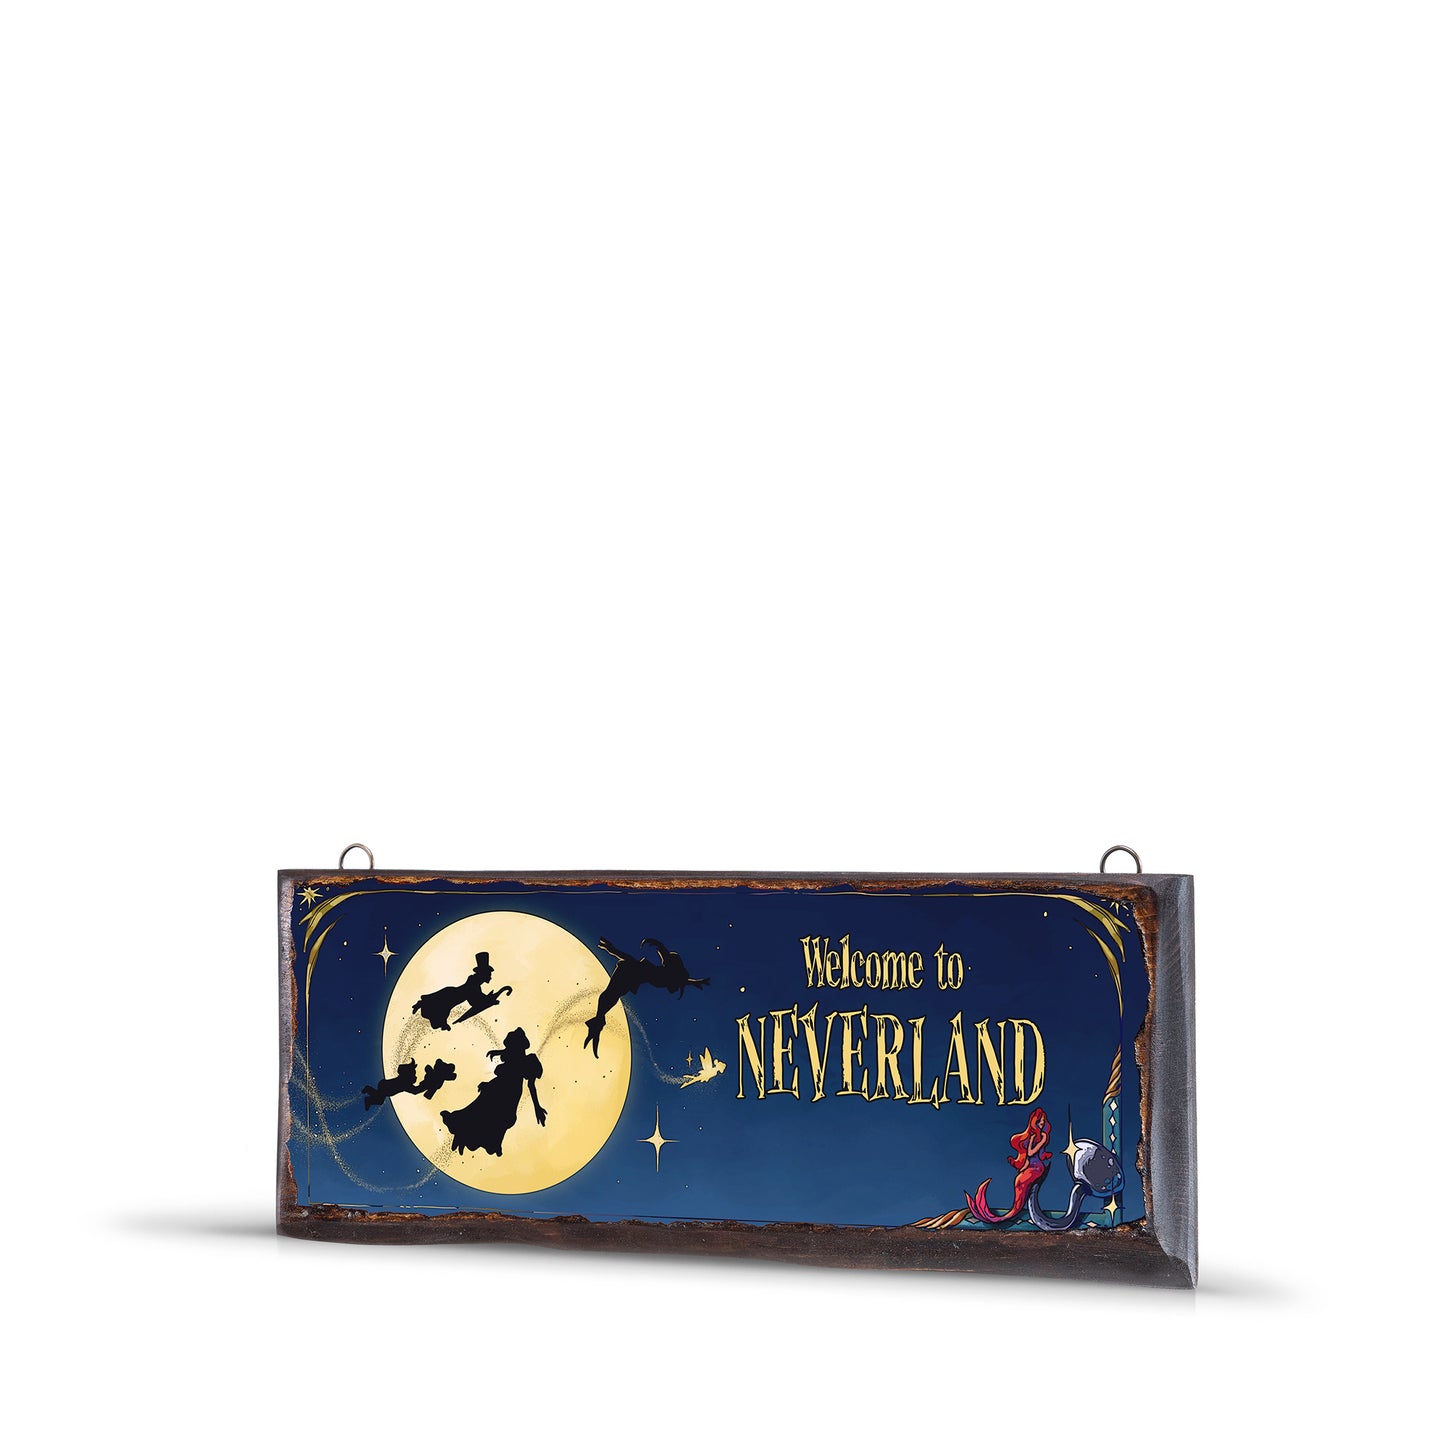 WELCOME TO NEVERLAND WOODEN SIGN - WS040